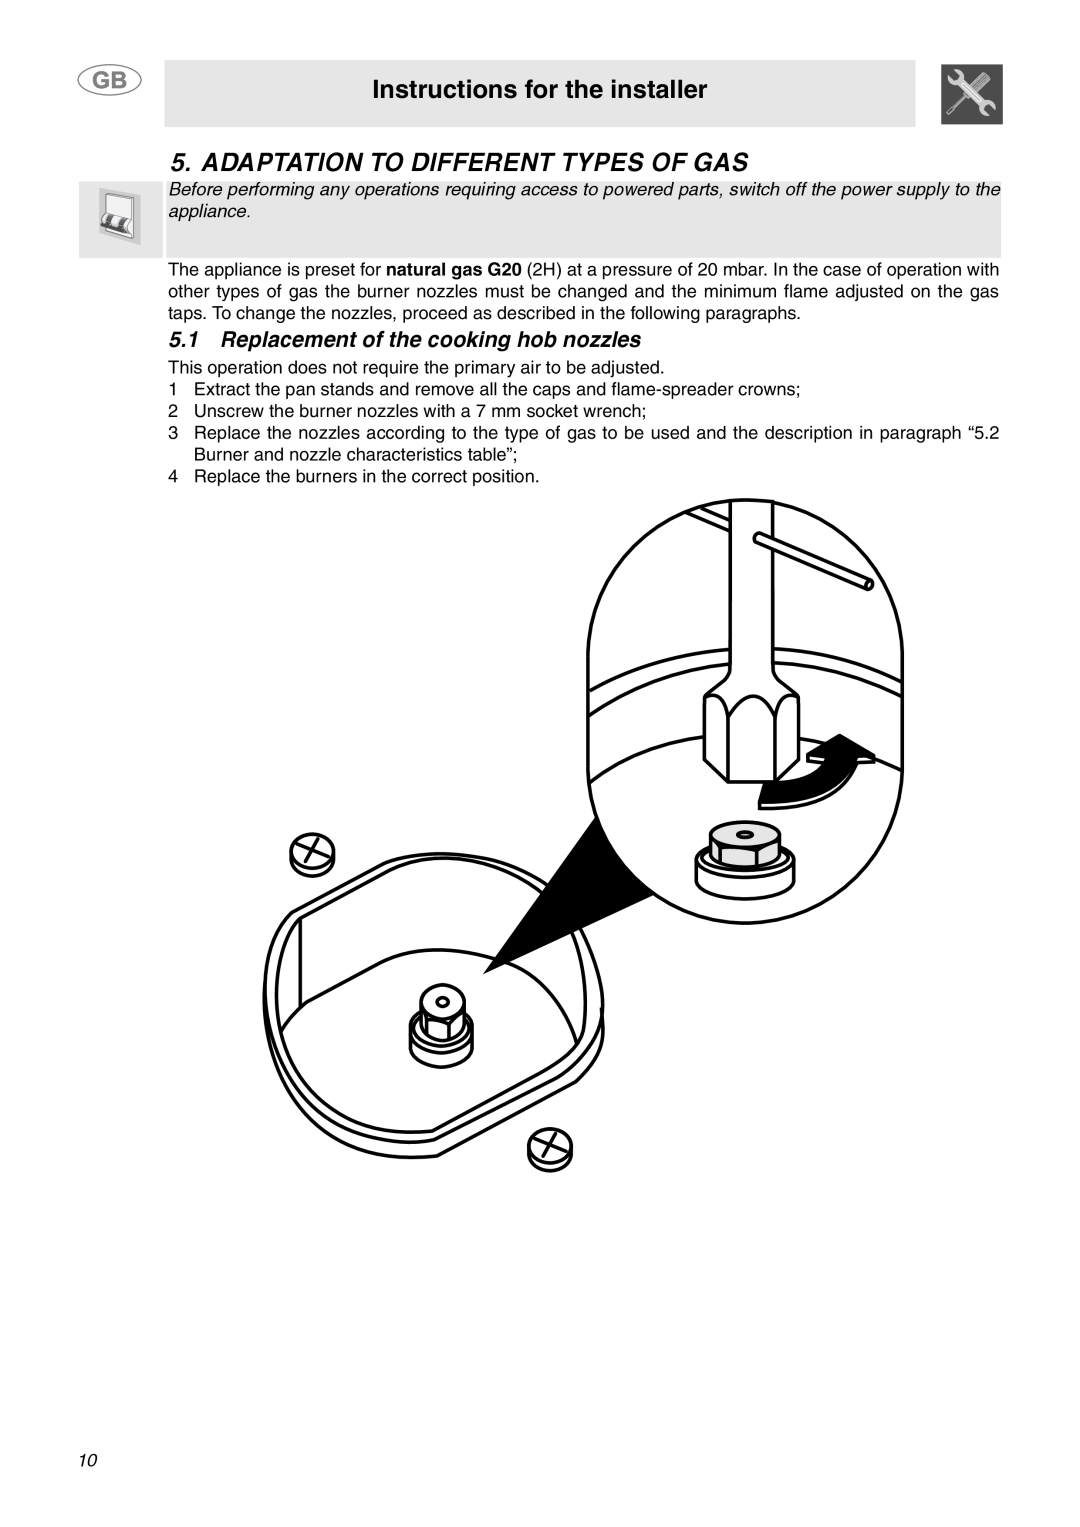 Smeg SY4110 Adaptation To Different Types Of Gas, Replacement of the cooking hob nozzles, Instructions for the installer 